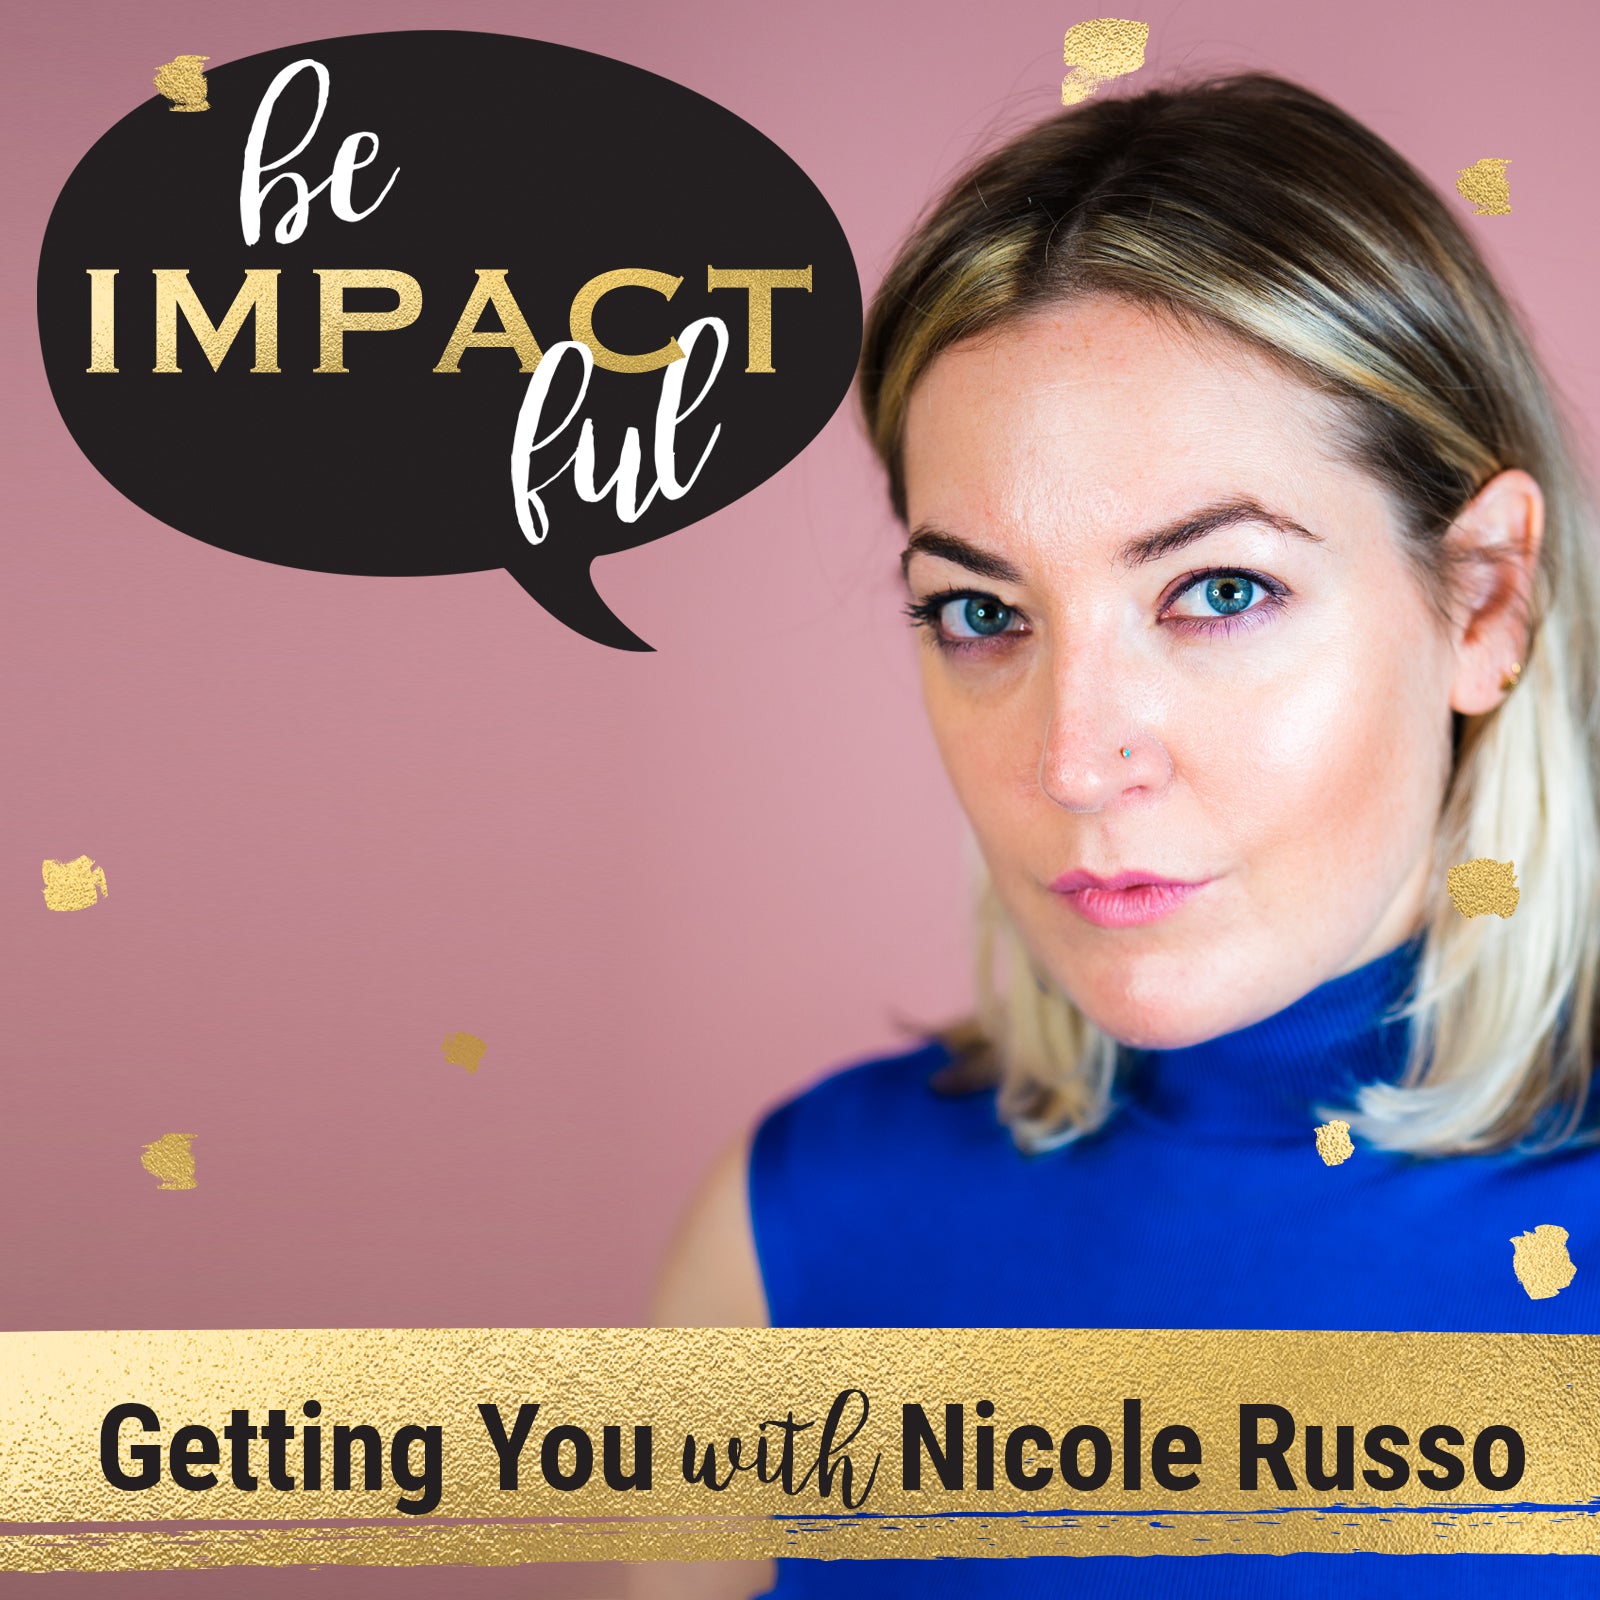 Getting You with Nicole Russo